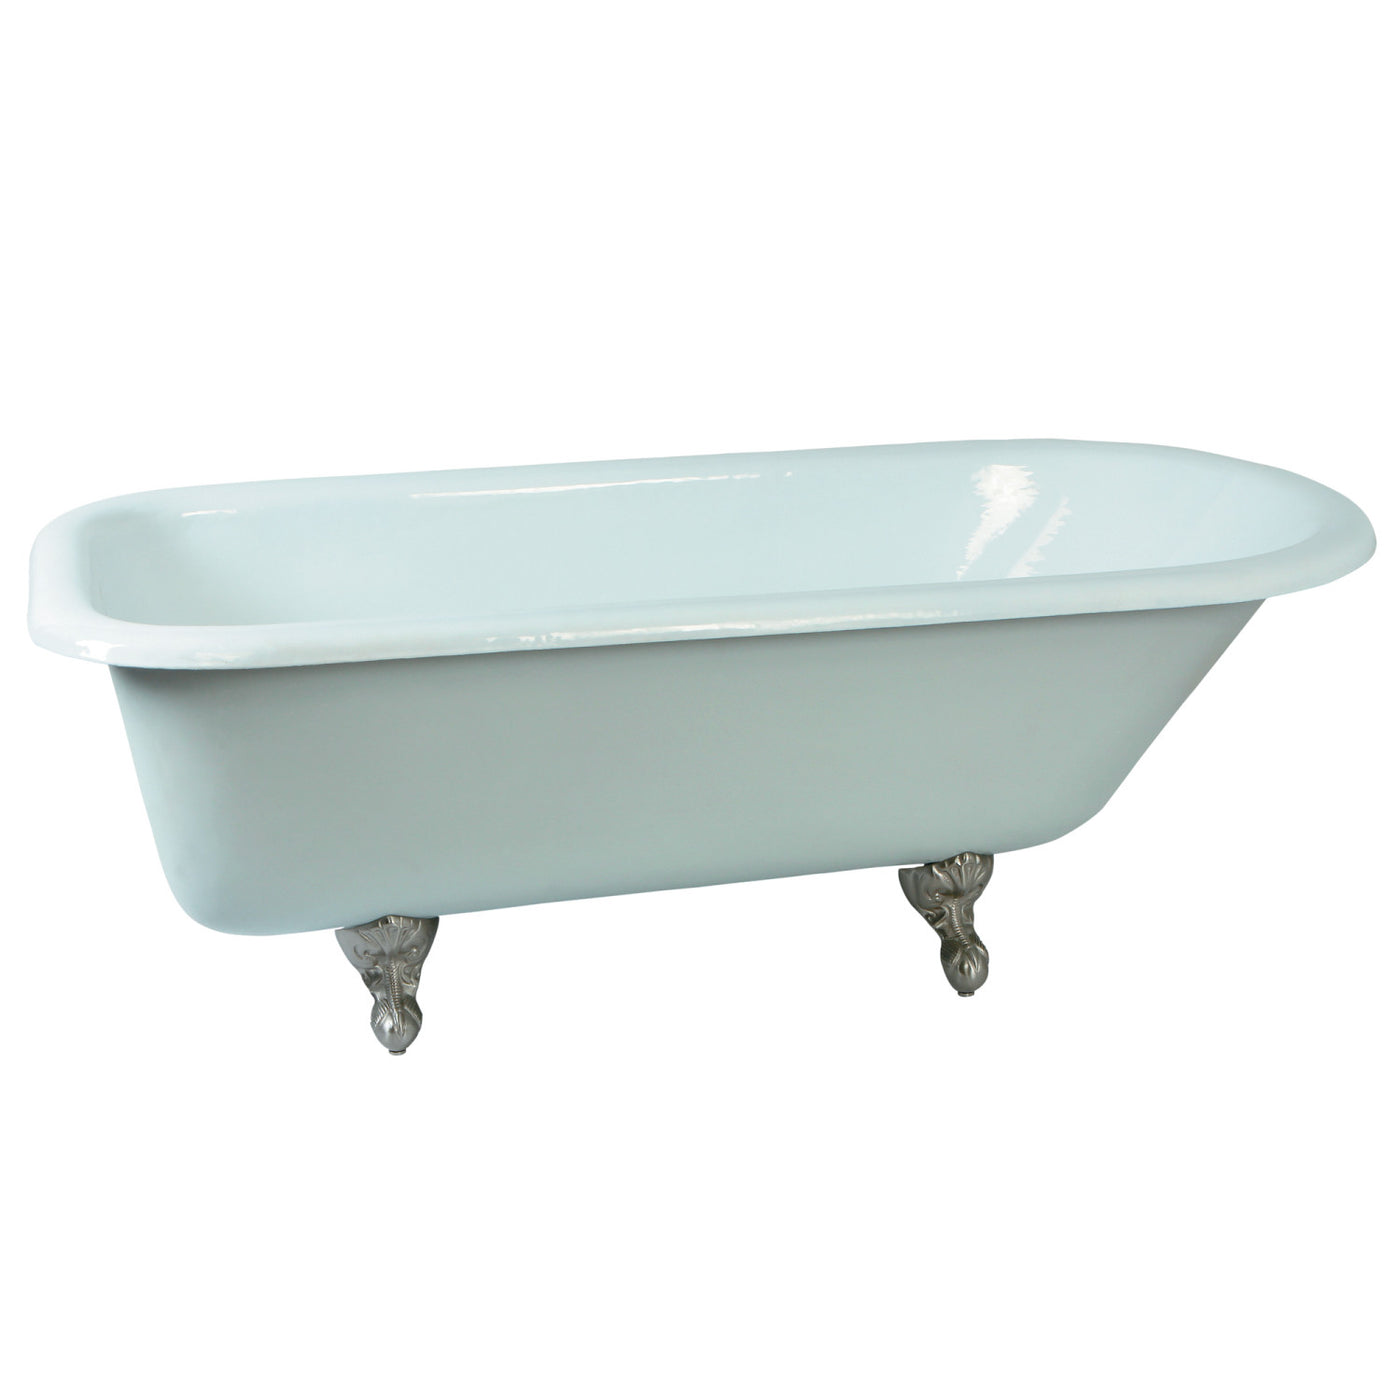 Elements of Design ECTND673123T8 67-Inch Cast Iron and Anti-Slide Roll Top Clawfoot Tub with Feet No Faucet Drillings, White/Brushed Nickel